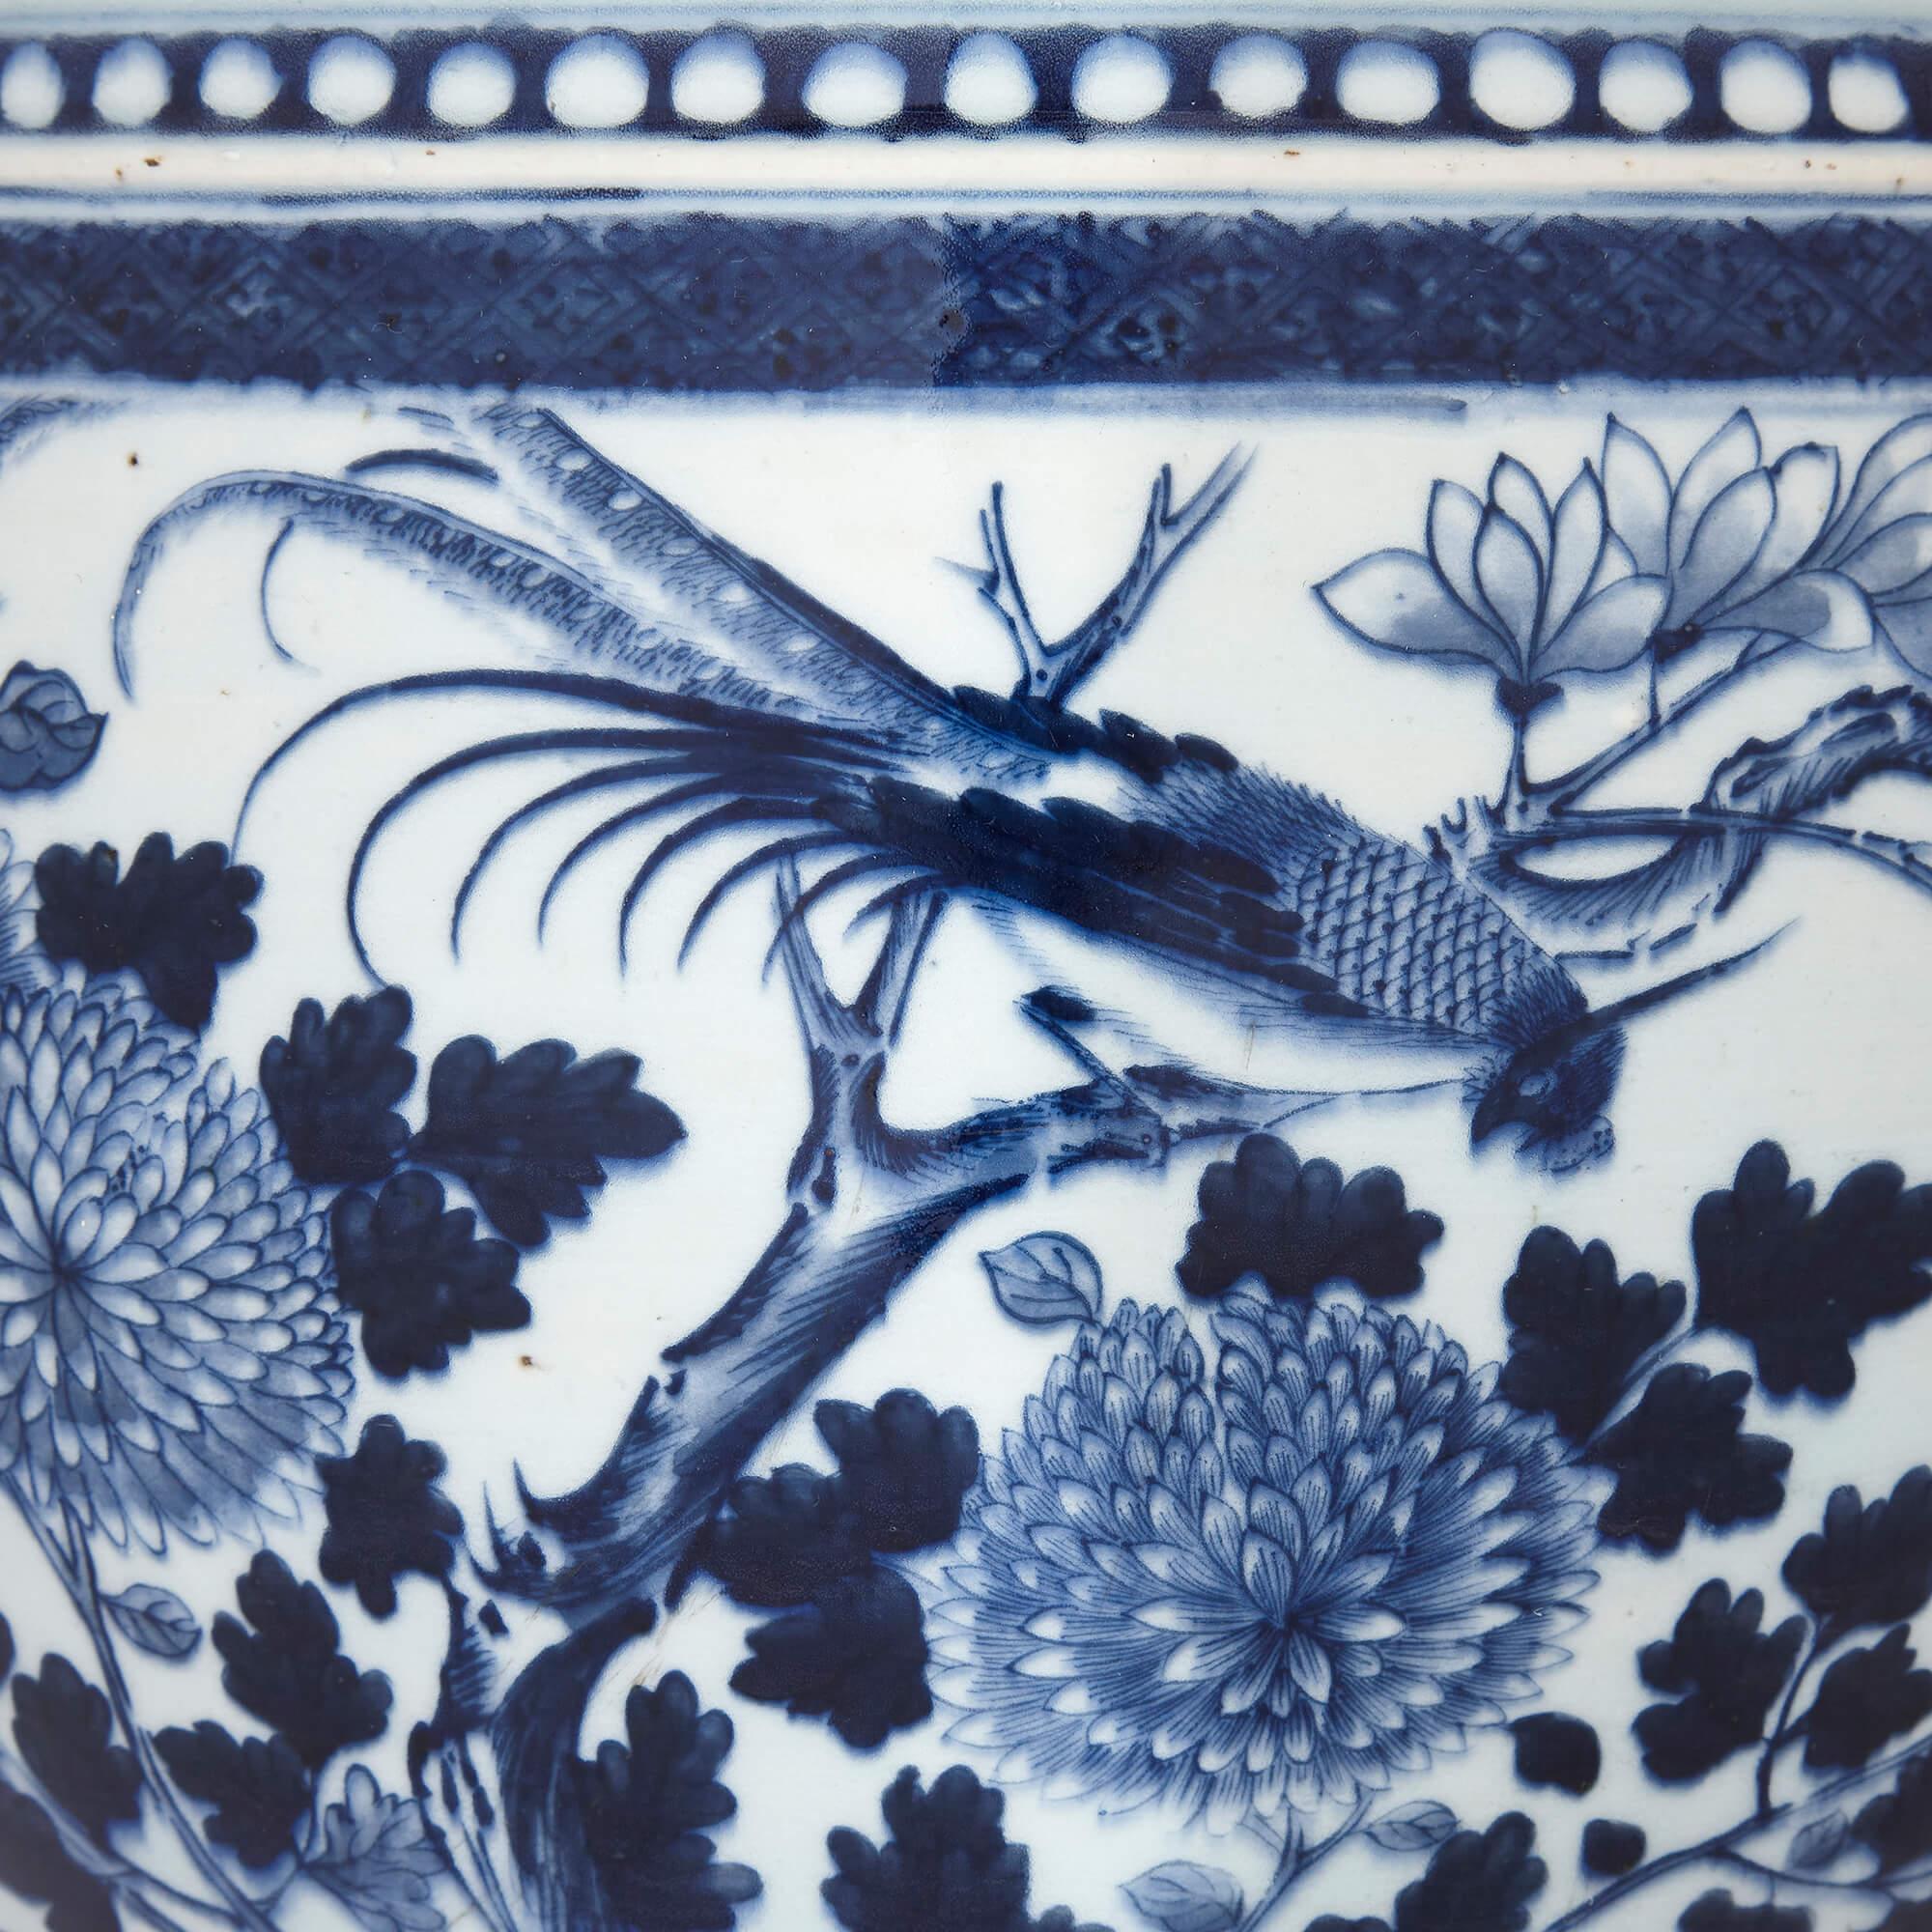 Qing Chinese Blue and White Antique Ceramic Jardiniere with Floral Designs